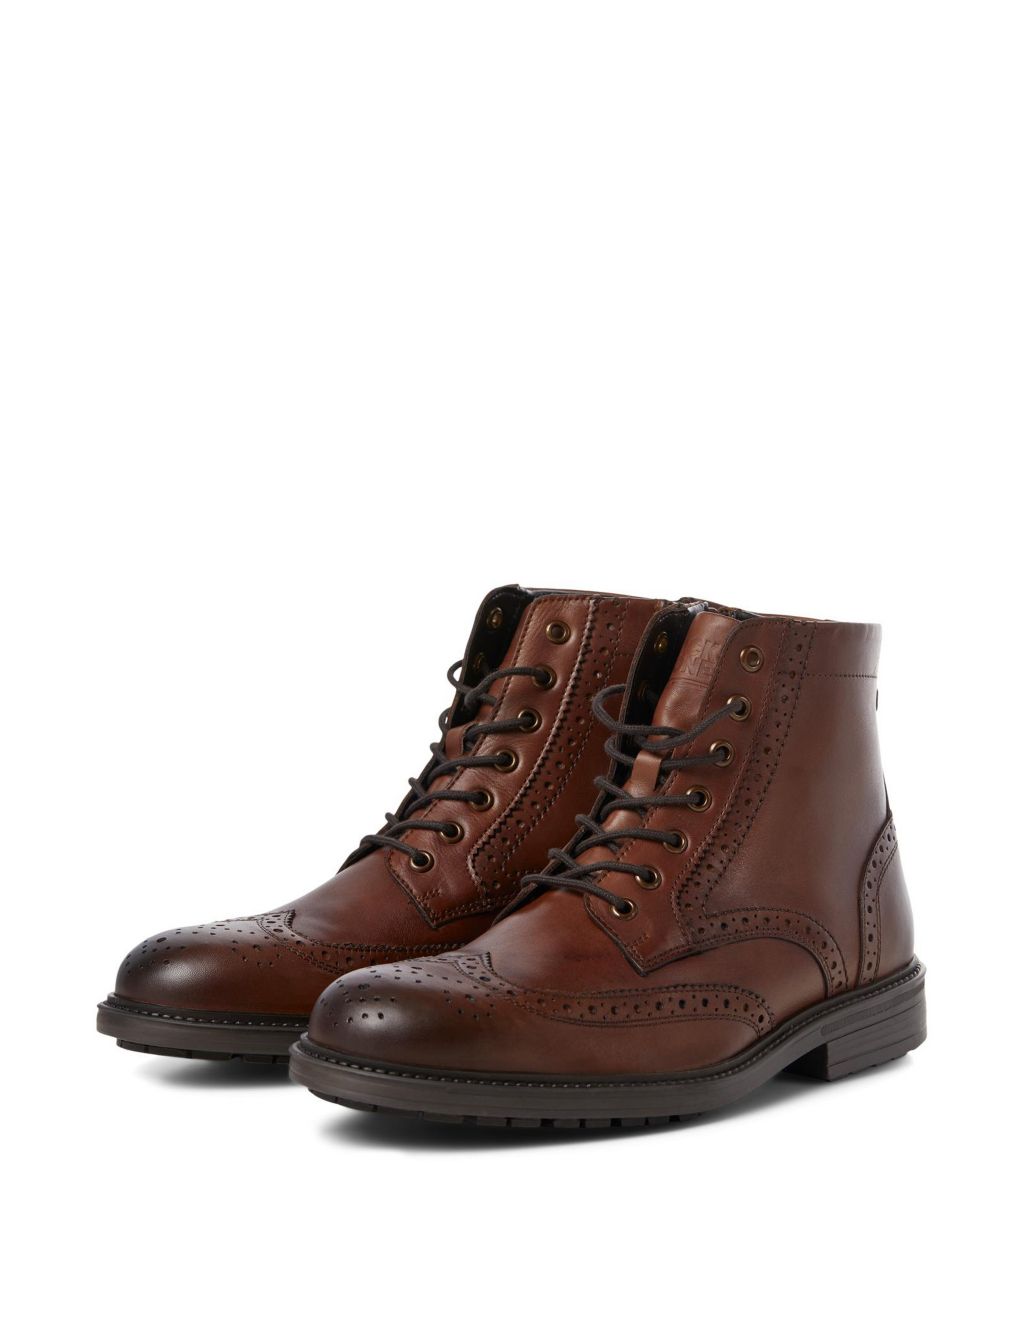 Leather Brogue Casual Boots image 2